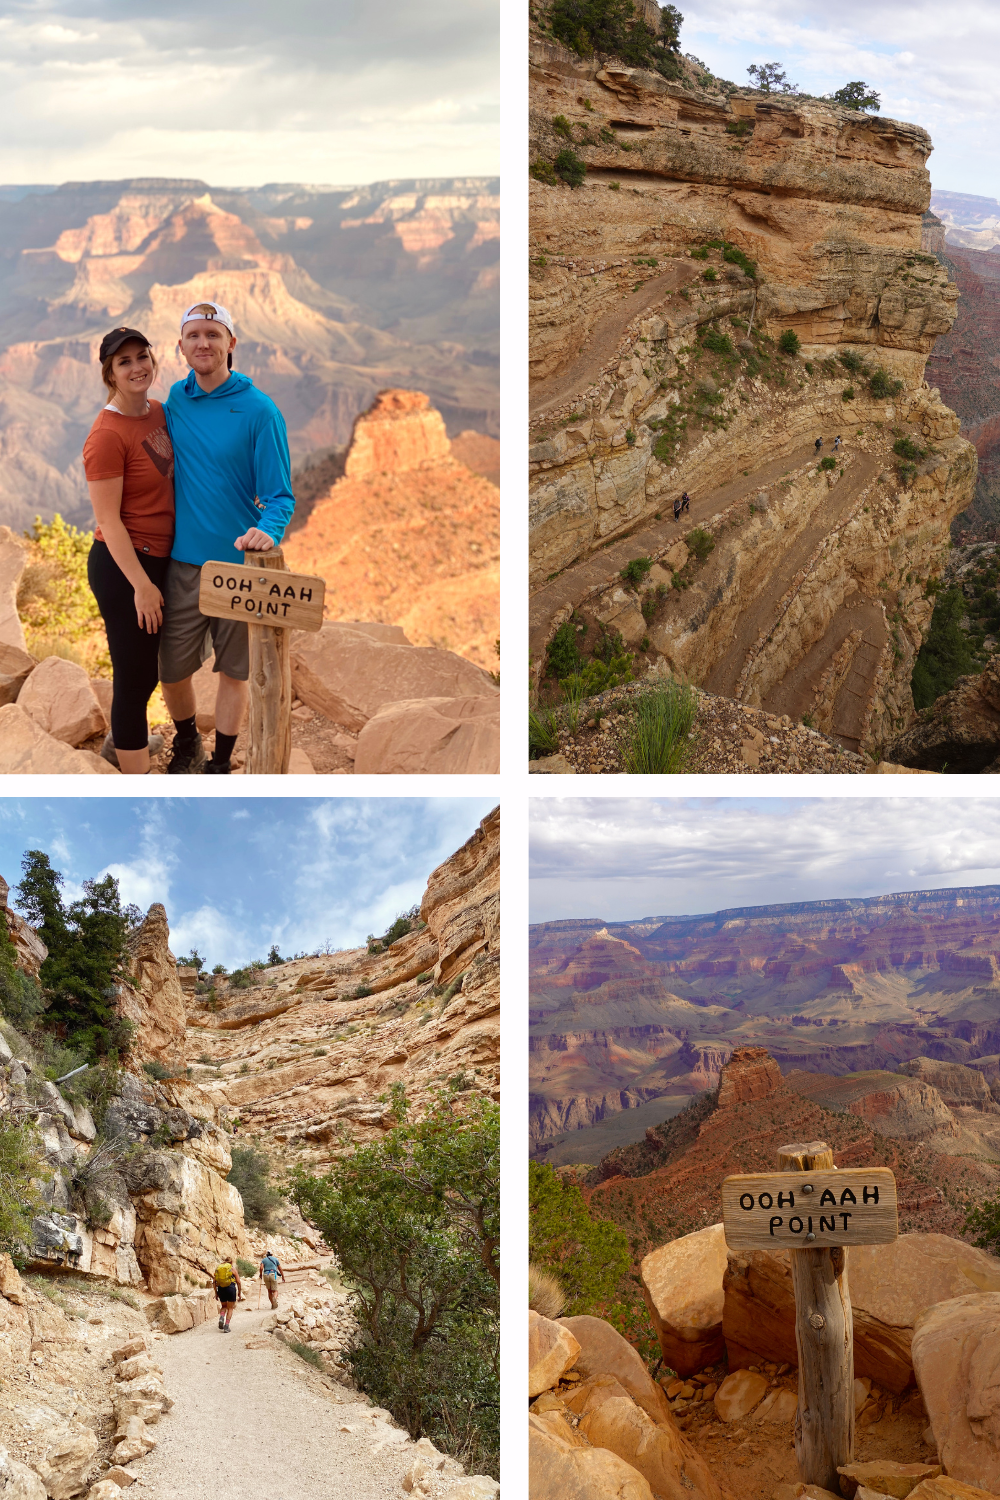 multiple photos with switchbacks and people standing by a sign saying ooh aah point